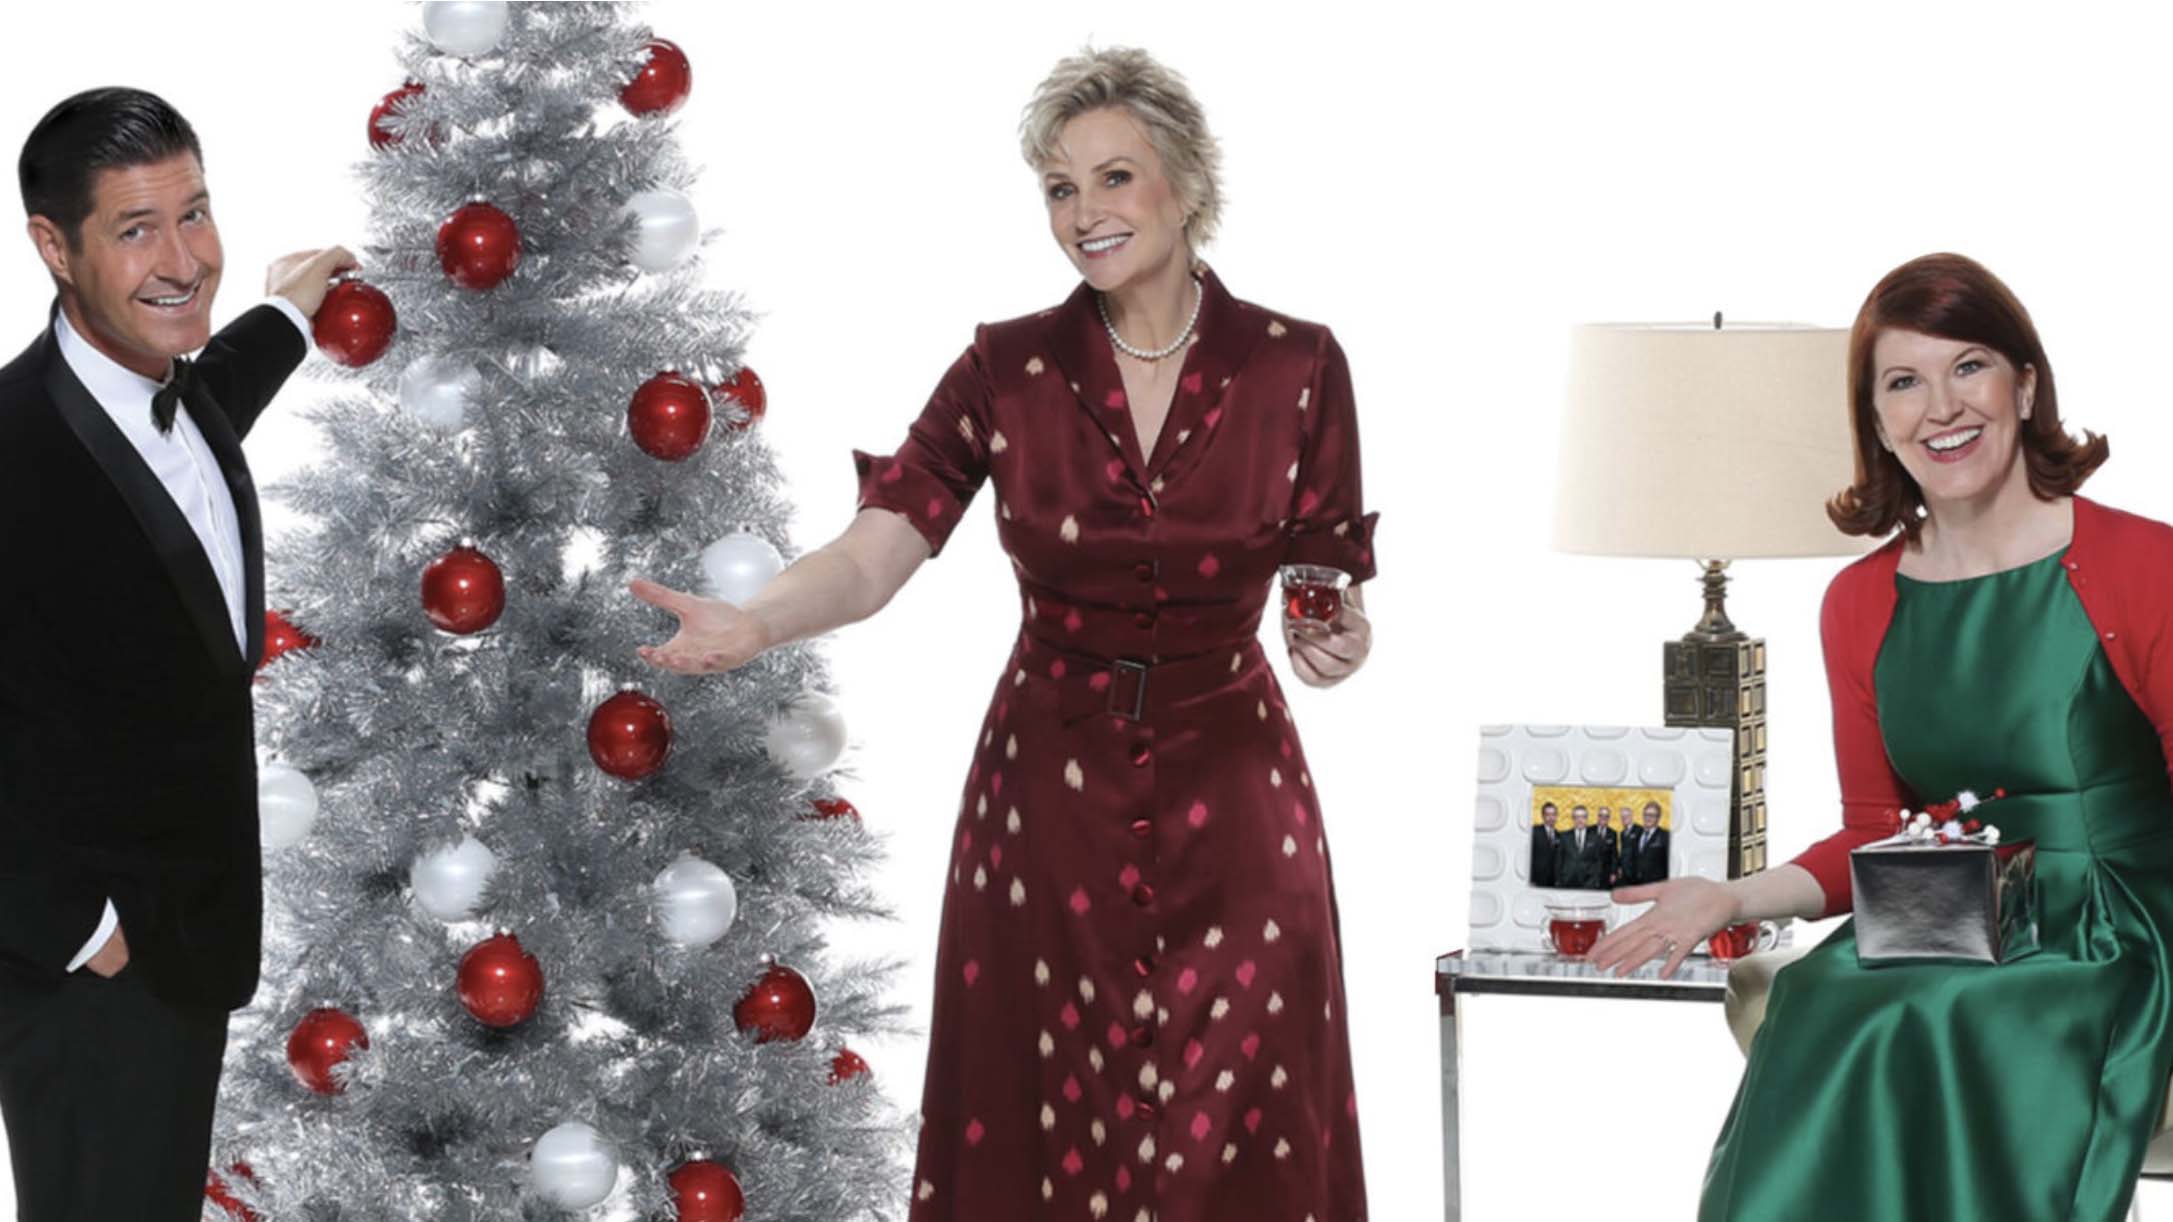 Jane Lynch is coming to town in "A Swingin’ Little Christmas Starring Jane Lynch" featuring Kate Flannery, Tim Davis & The Tony Guerrero Quintet. 